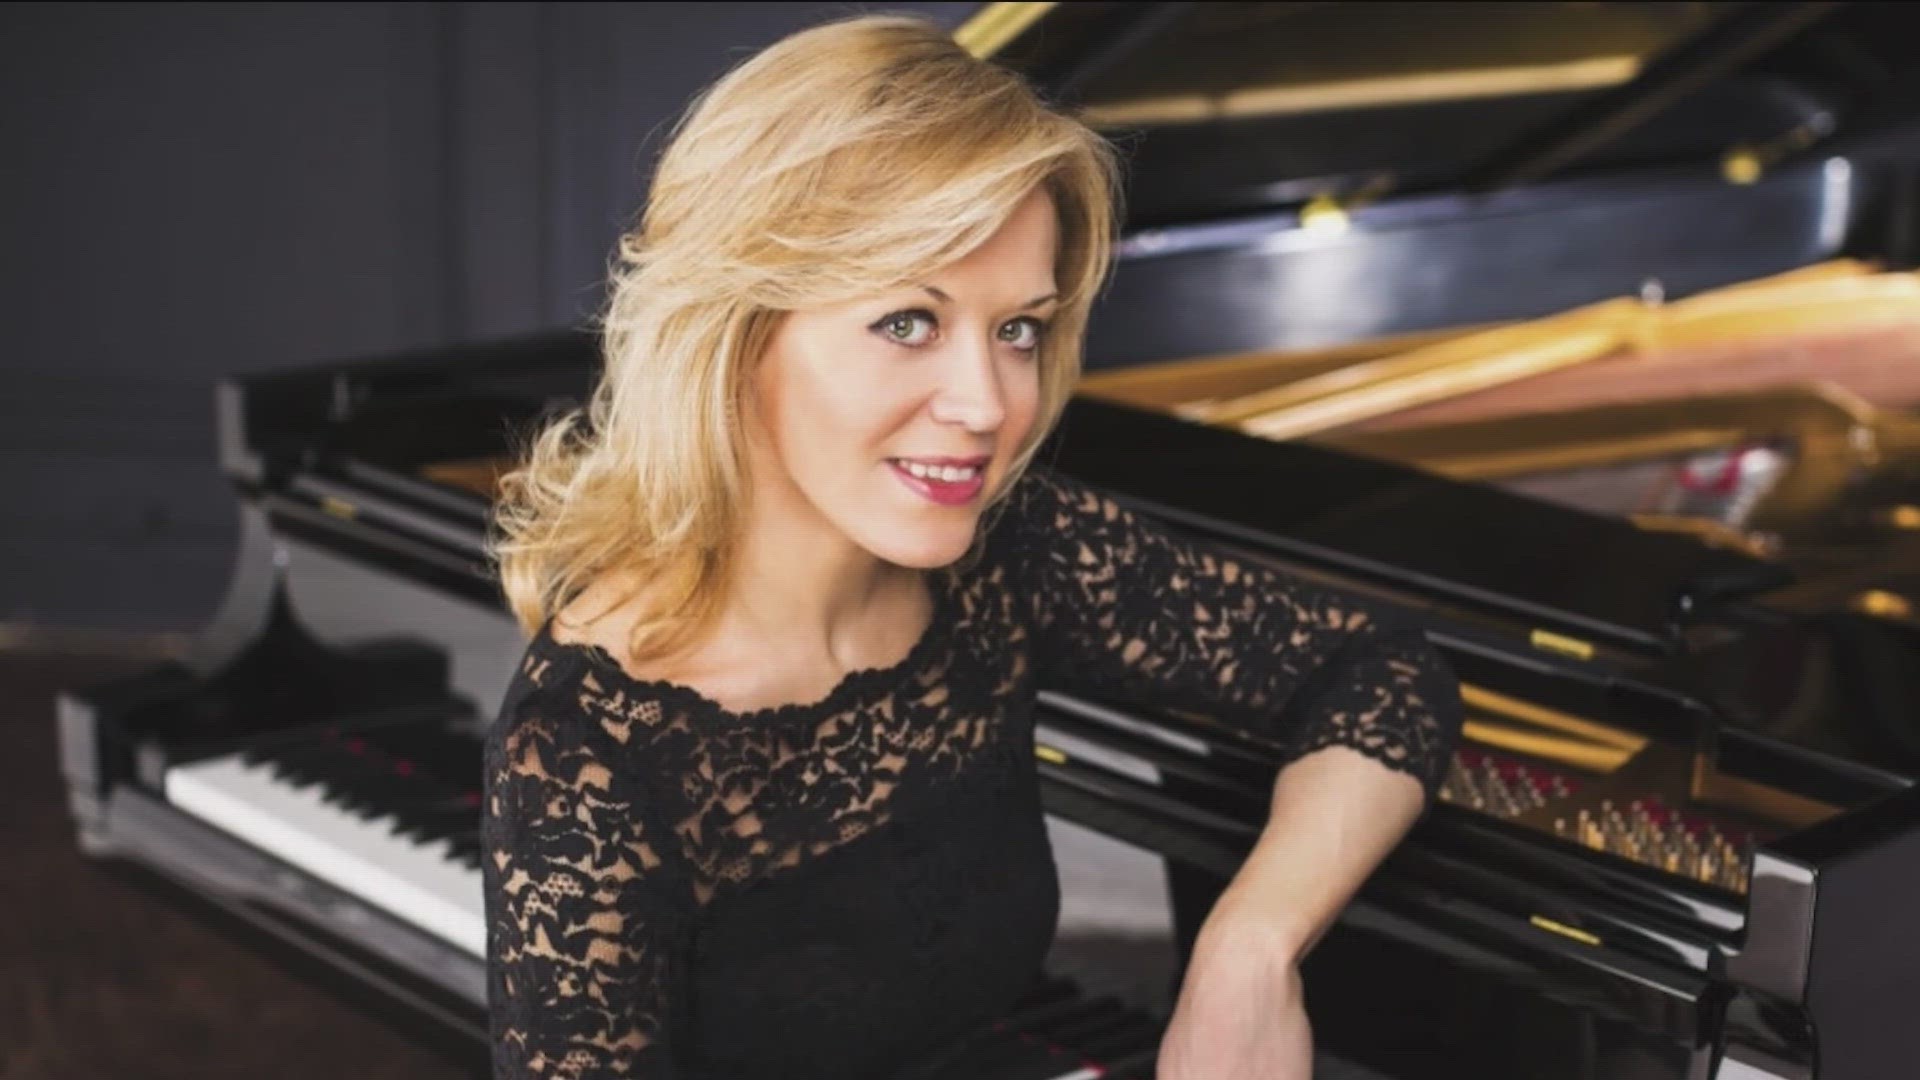 Kern is considered one of the world's best classical pianists, and will attempt to play a series of difficult concerti with the Austin Symphony Orchestra.